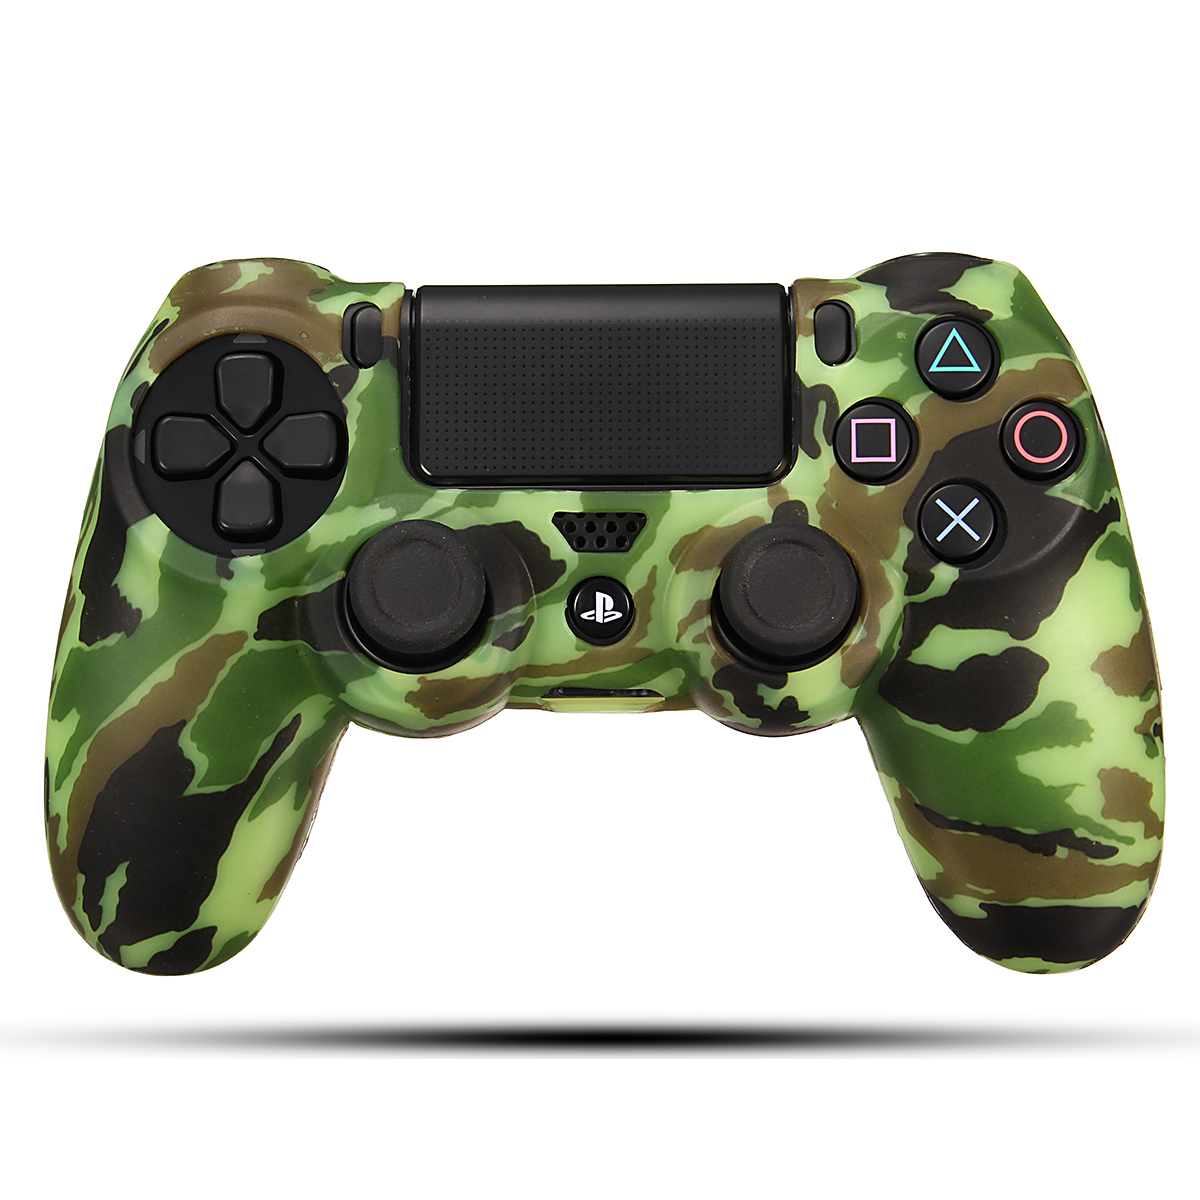 Durable Decal Camouflage Grip Cover Case Silicone Rubber Soft Skin Protector for Playstation 4 for Dualshock 4 Gamepad 17